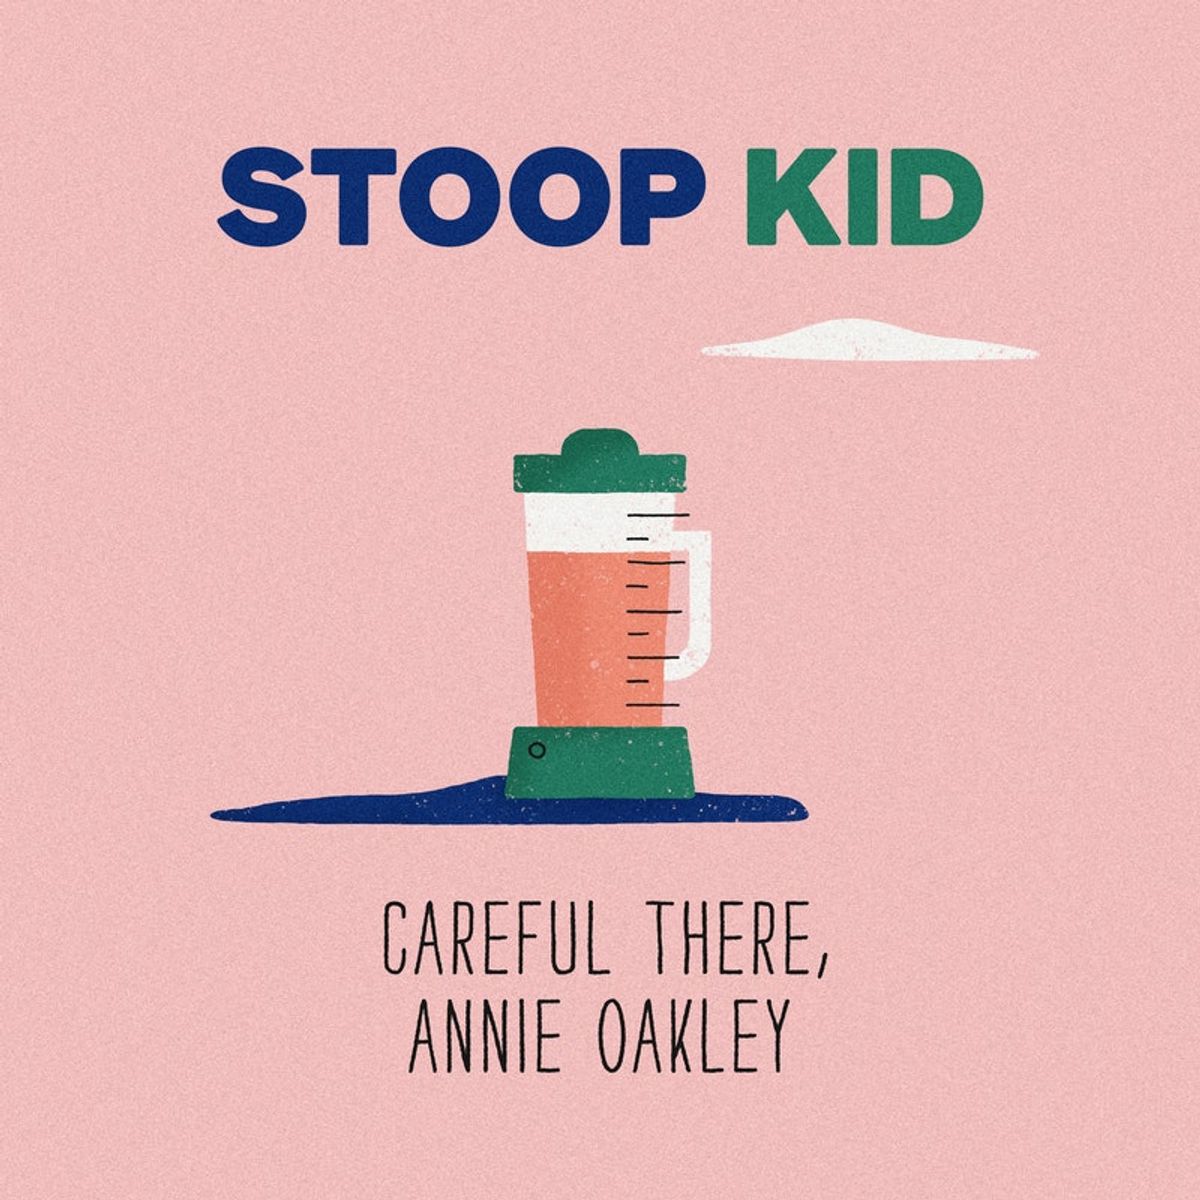 Stoop Kid - Careful There, Annie Oakley